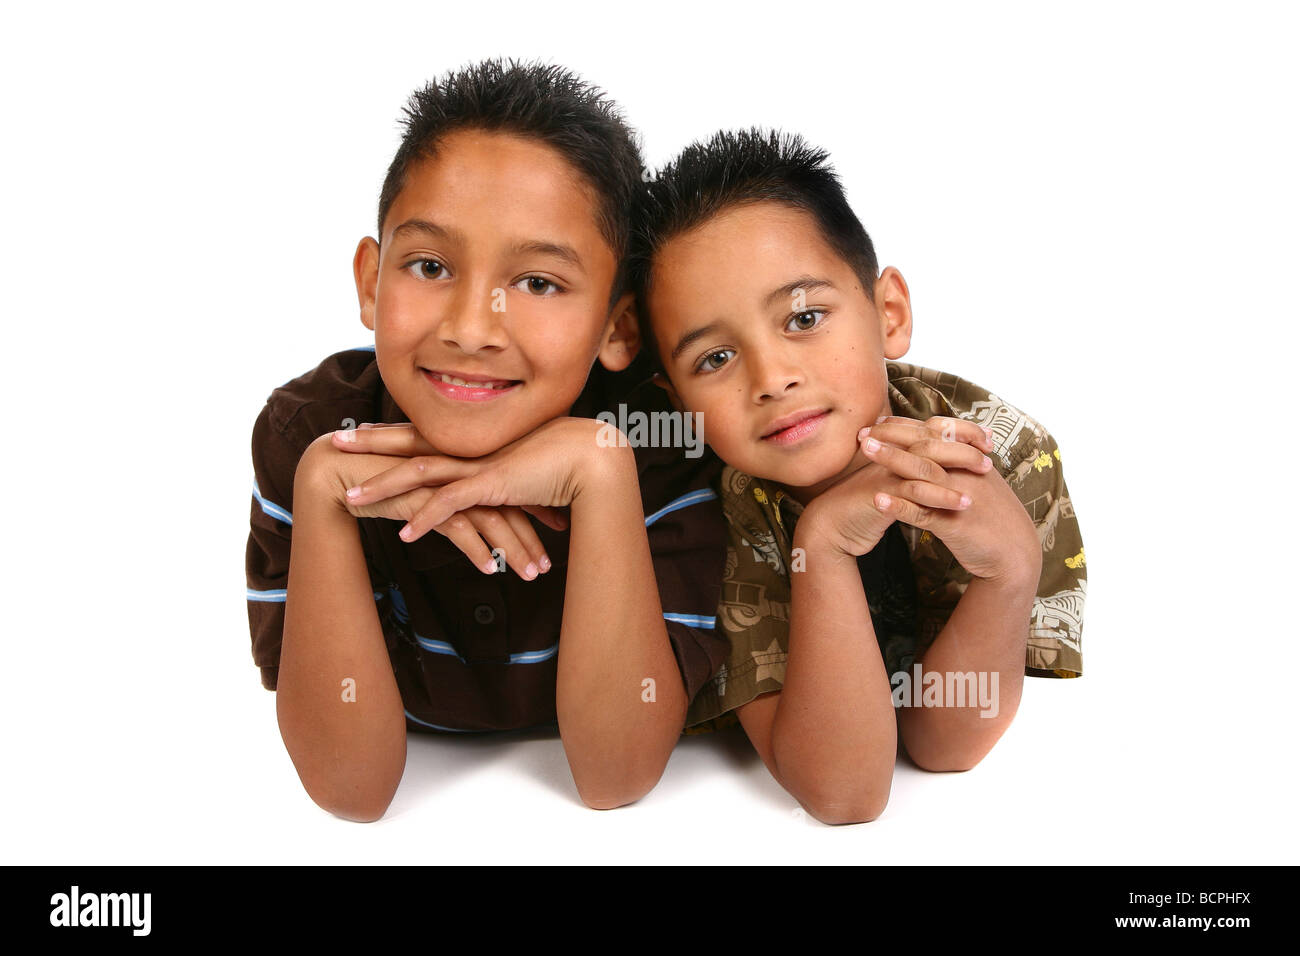 Two Hispanic Young Brothers Smiling on White Background Stock Photo